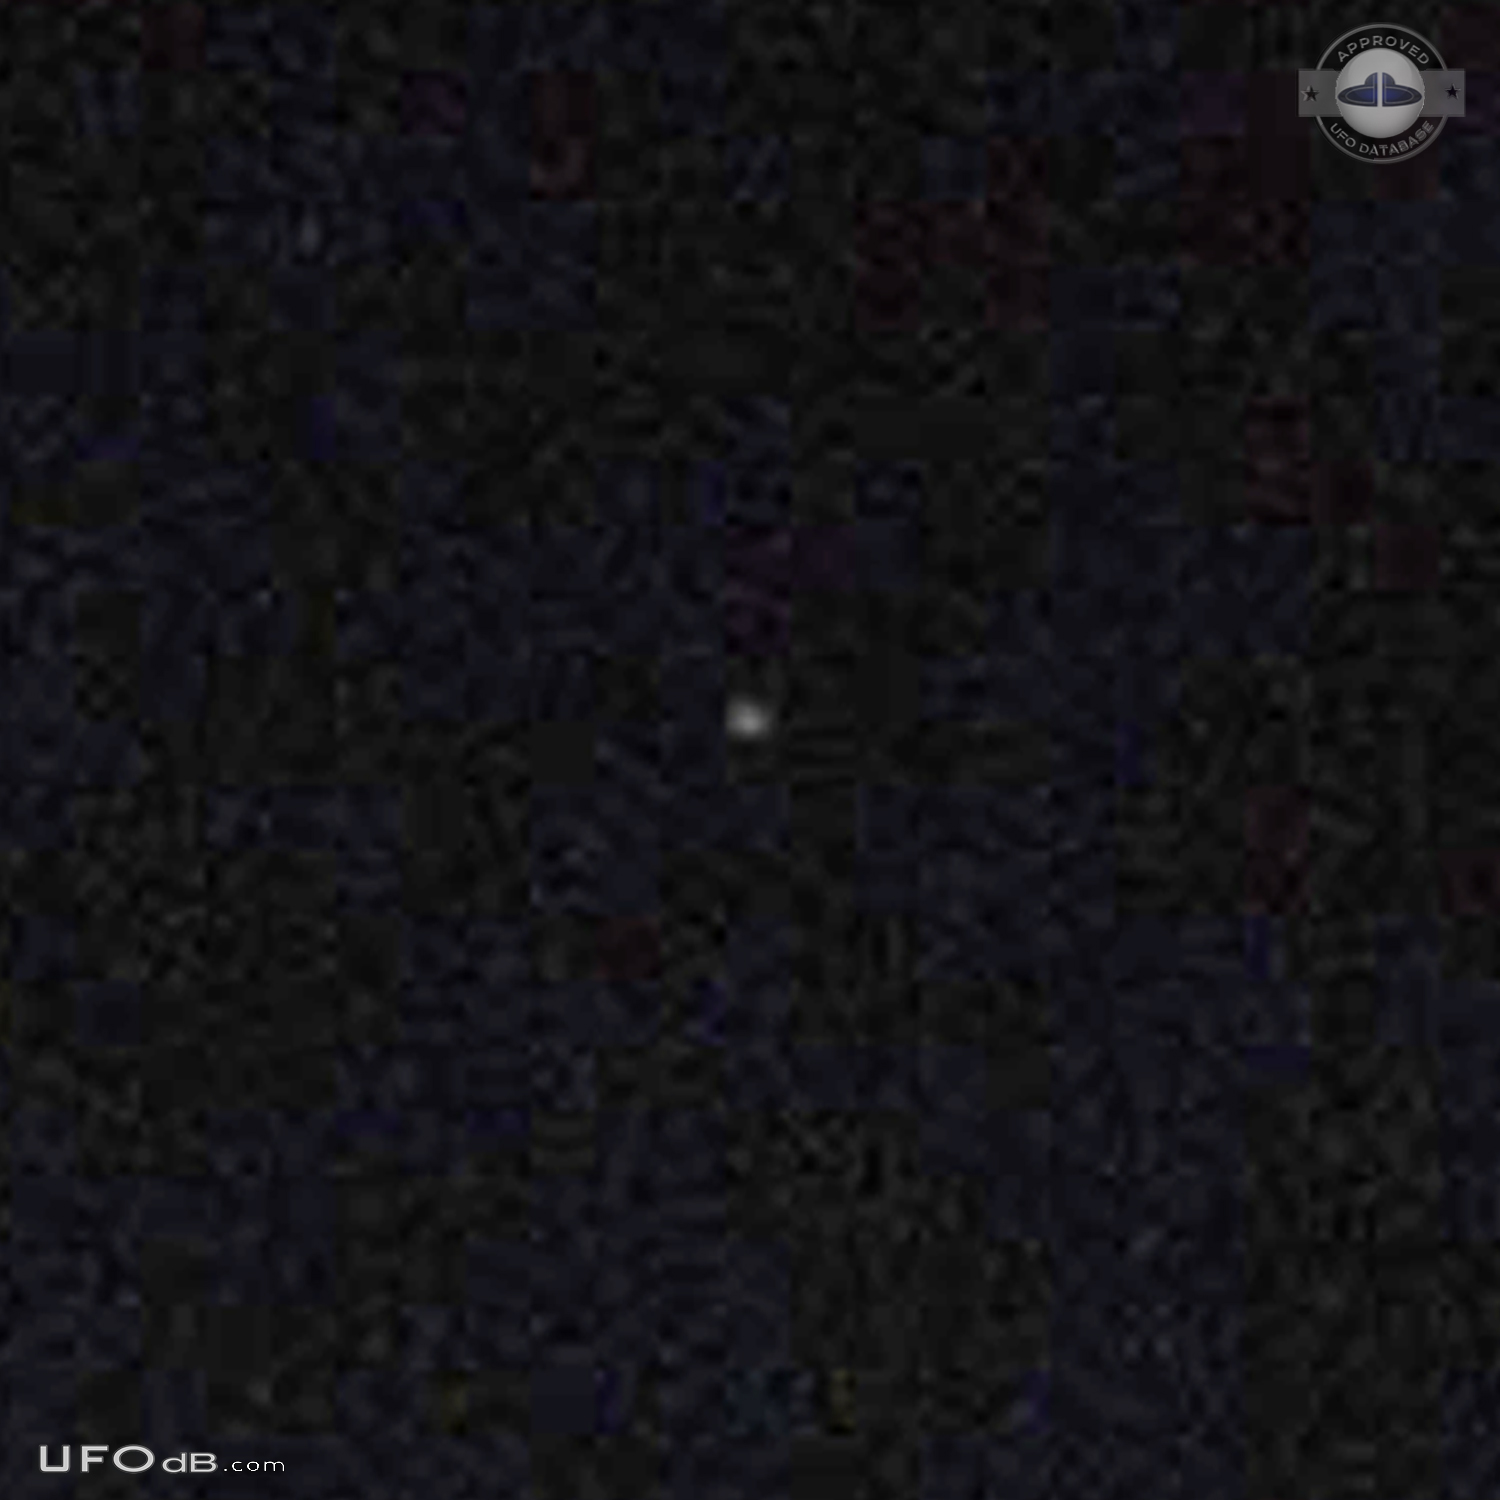 UFO first seen on 16 then seen again 17 oct 2015 - Providence Village  UFO Picture #733-3